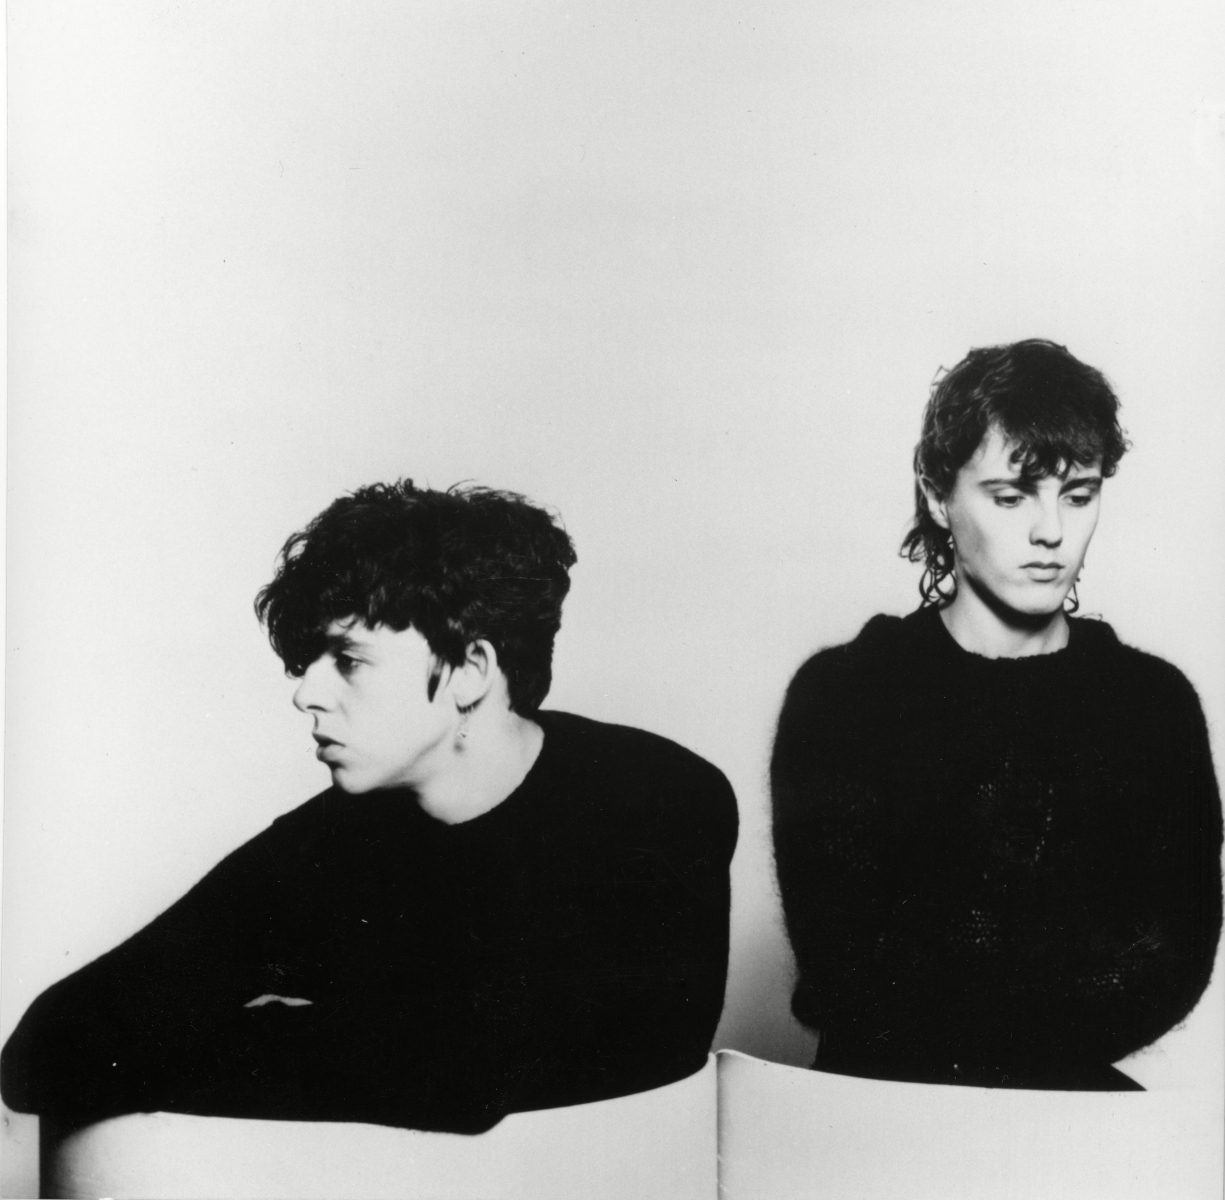 <p>They’ve been friends and musical collaborators over the course of five decades, dealt with worldwide stardom and personal turmoil, and endured a split that lasted nine years, but now the British hitmakers Tears For Fears are back. The musical story of band members Roland Orzabal and Curt Smith might have started in the 1980s, but it’s remained an interesting one. Let's look back at the albums and moments that made them.</p>